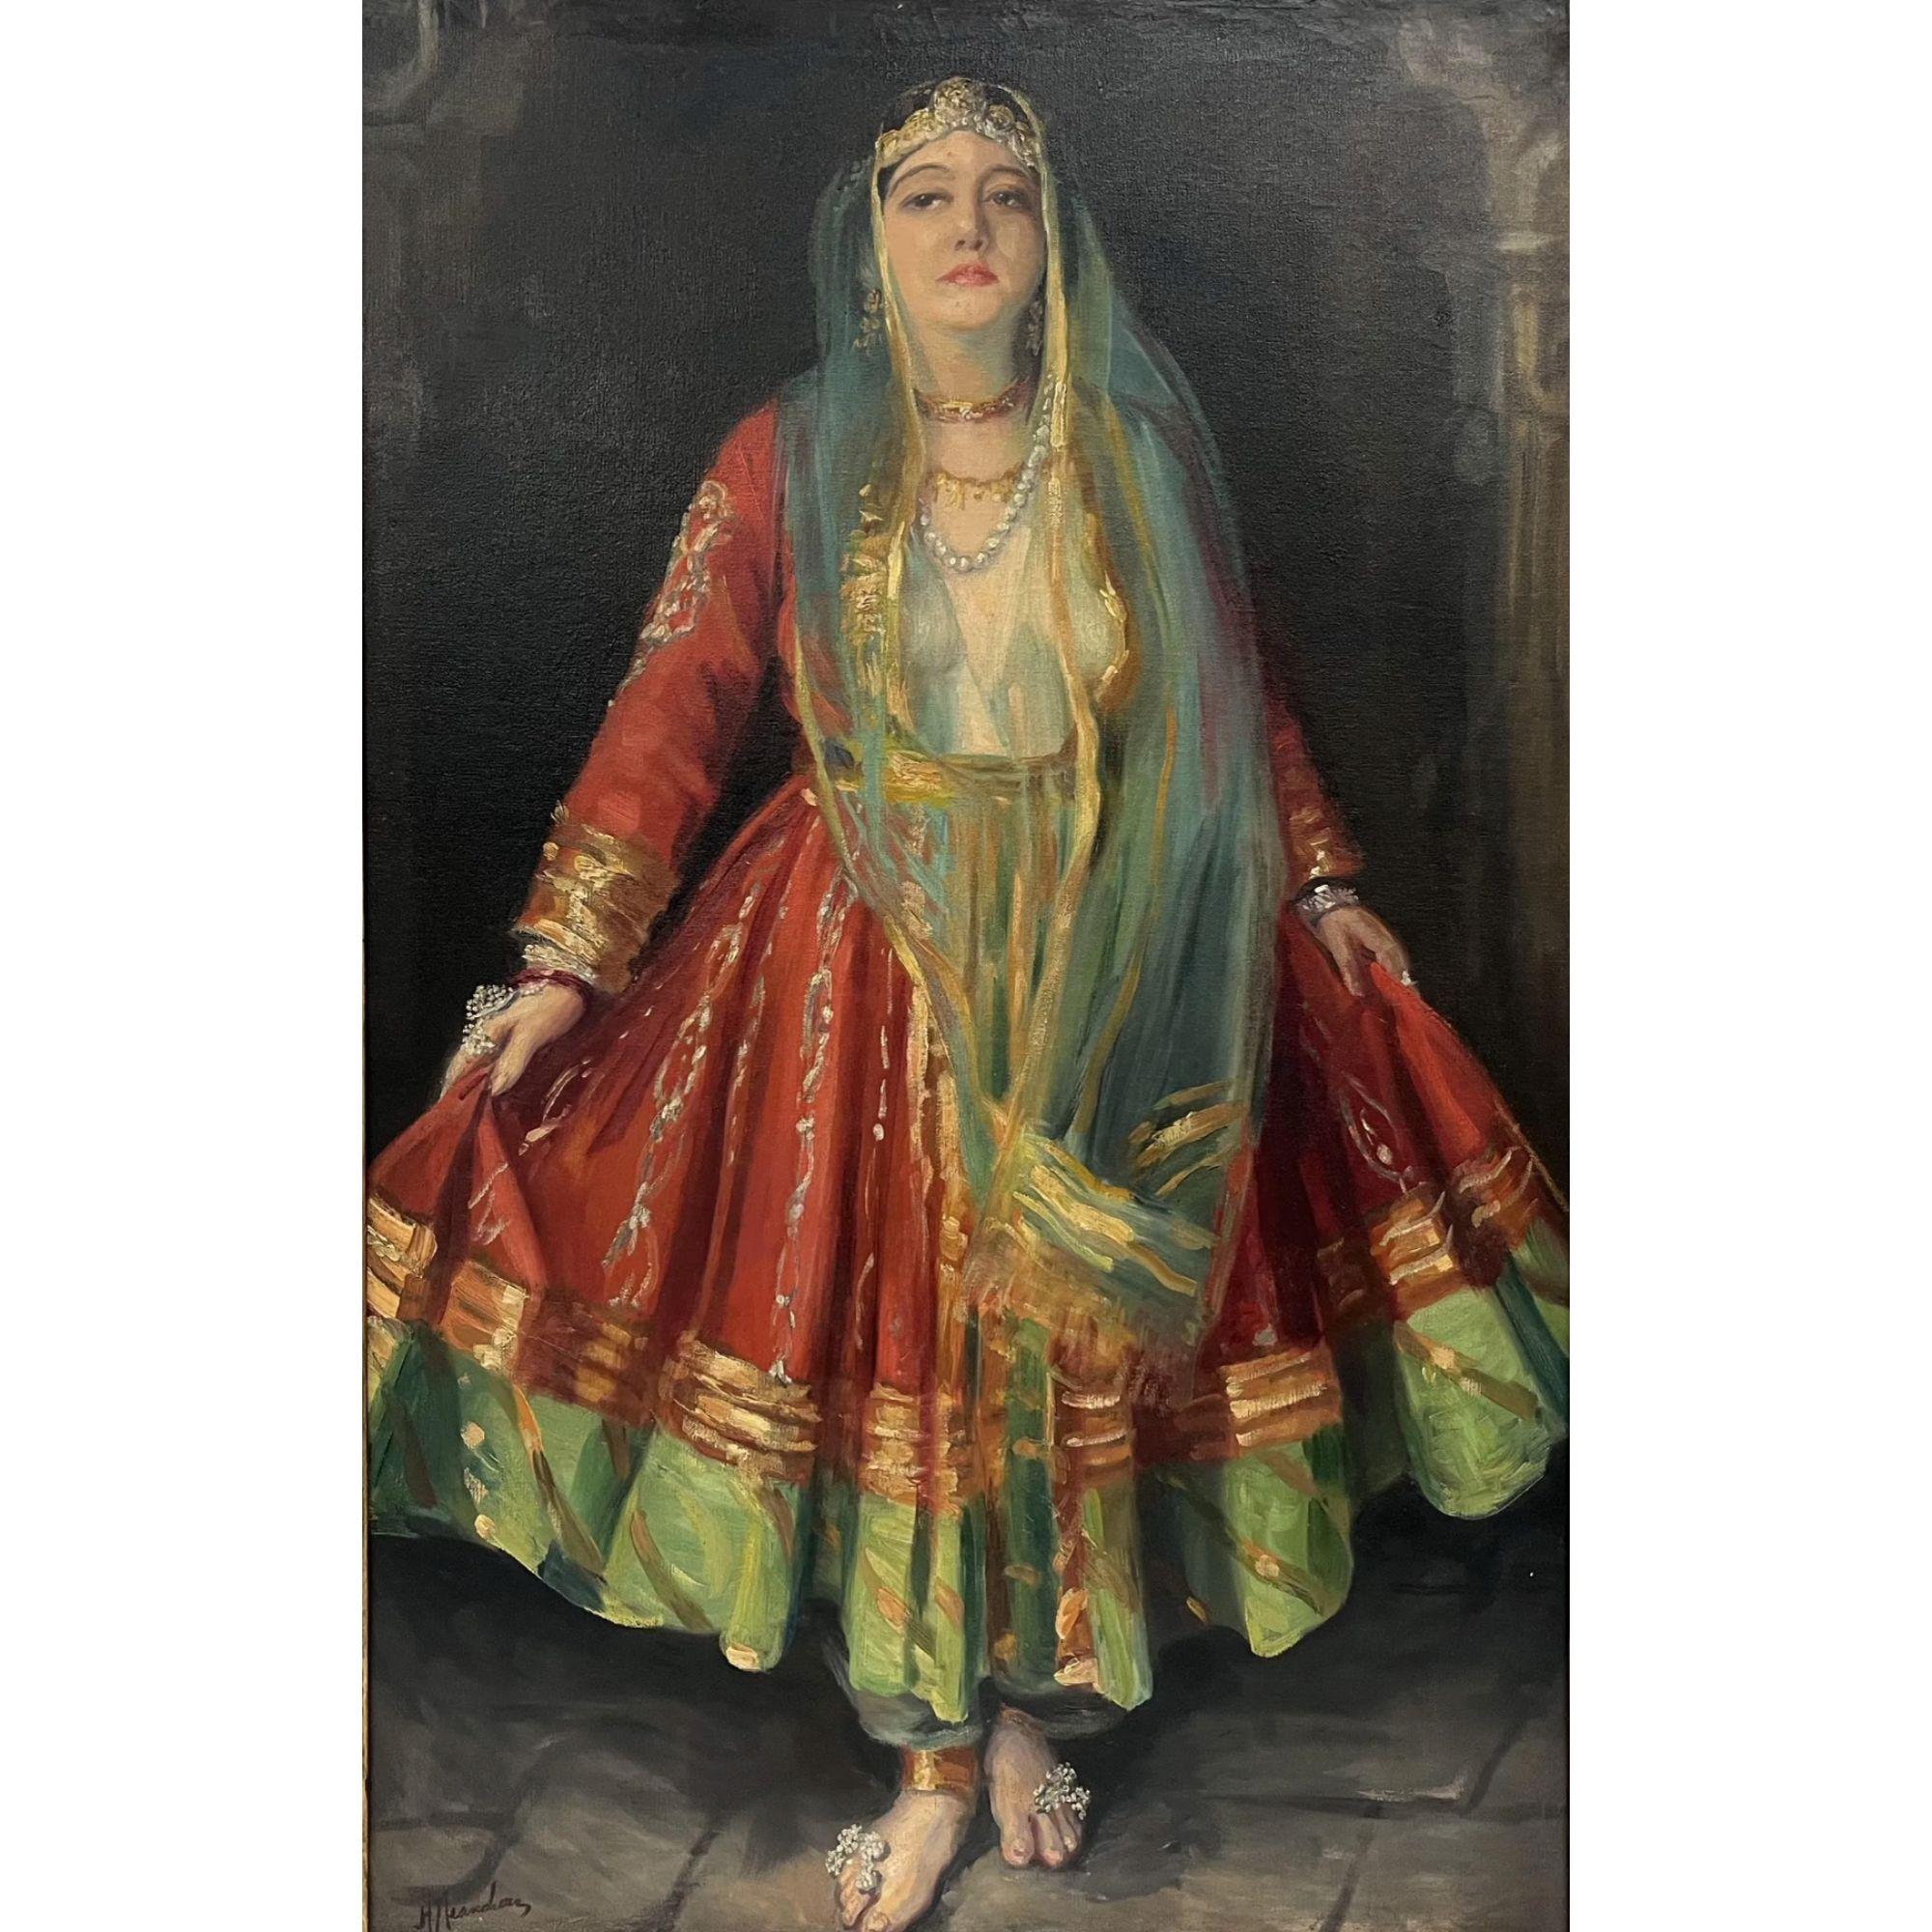 Antique Indian Woman Portrait Oil on Canvas Painting Depicting a Gorgeous Young Lady Standing Upright Singh Signed Lower Left Illegible Double Lined.